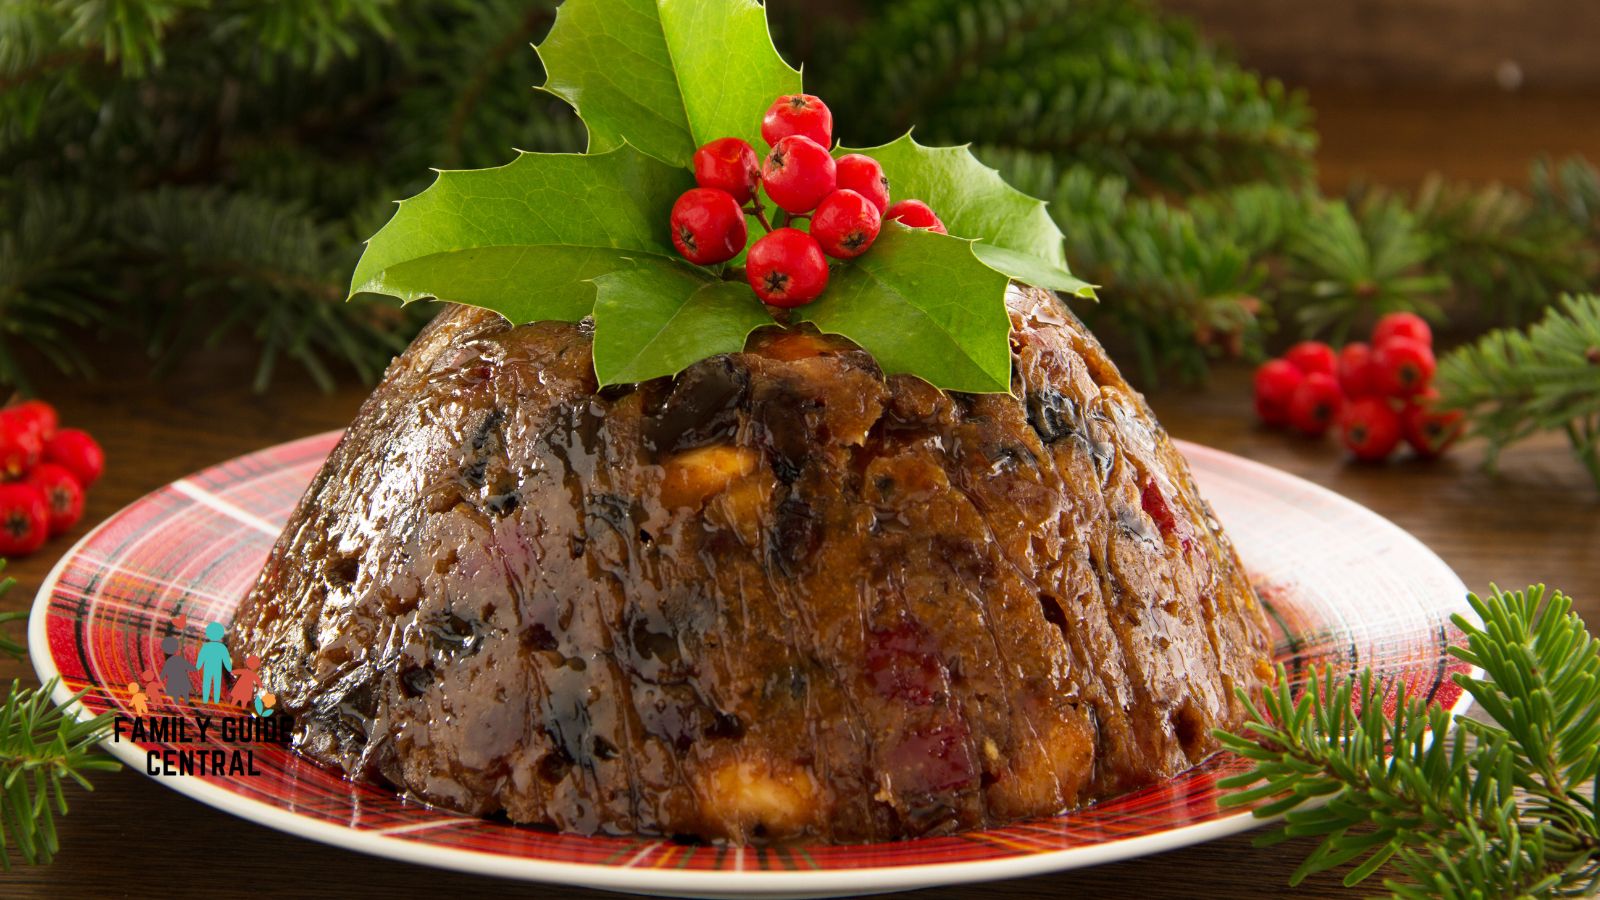 Christmas pudding cooked in the microwave - familyguidecentral.com